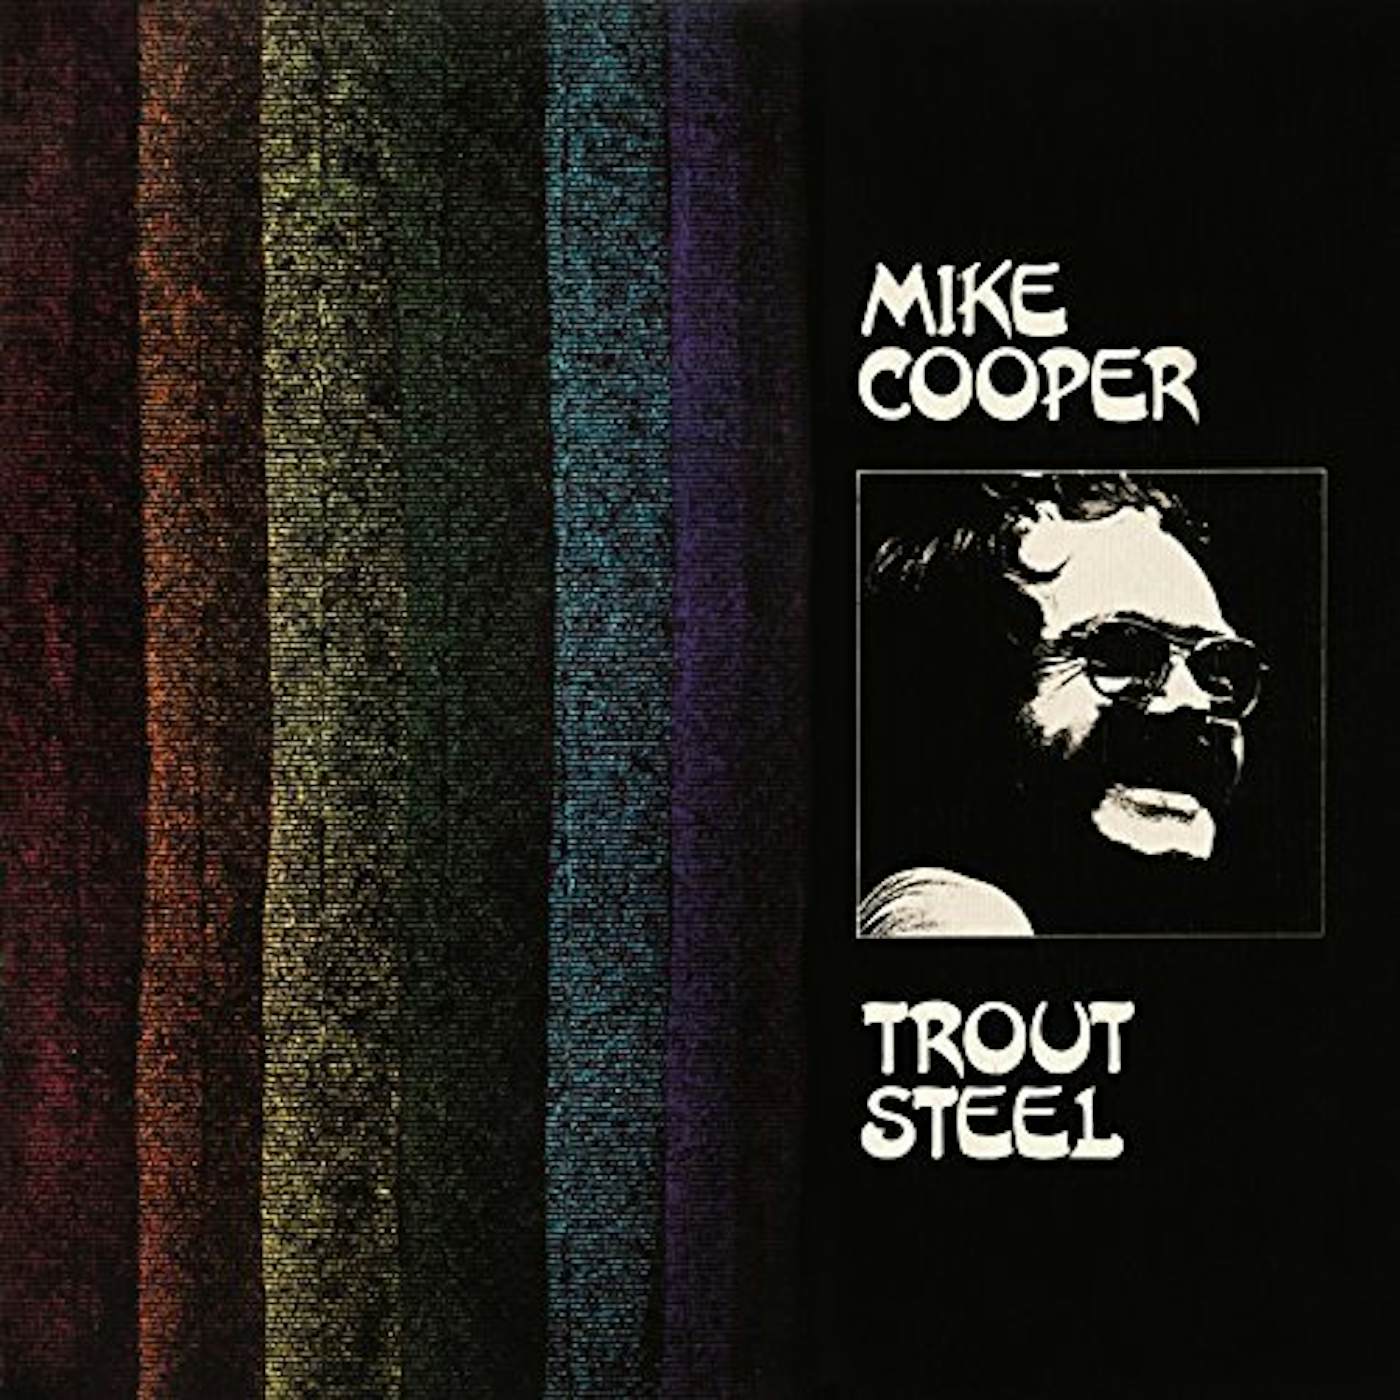 Mike Cooper Trout Steel Vinyl Record